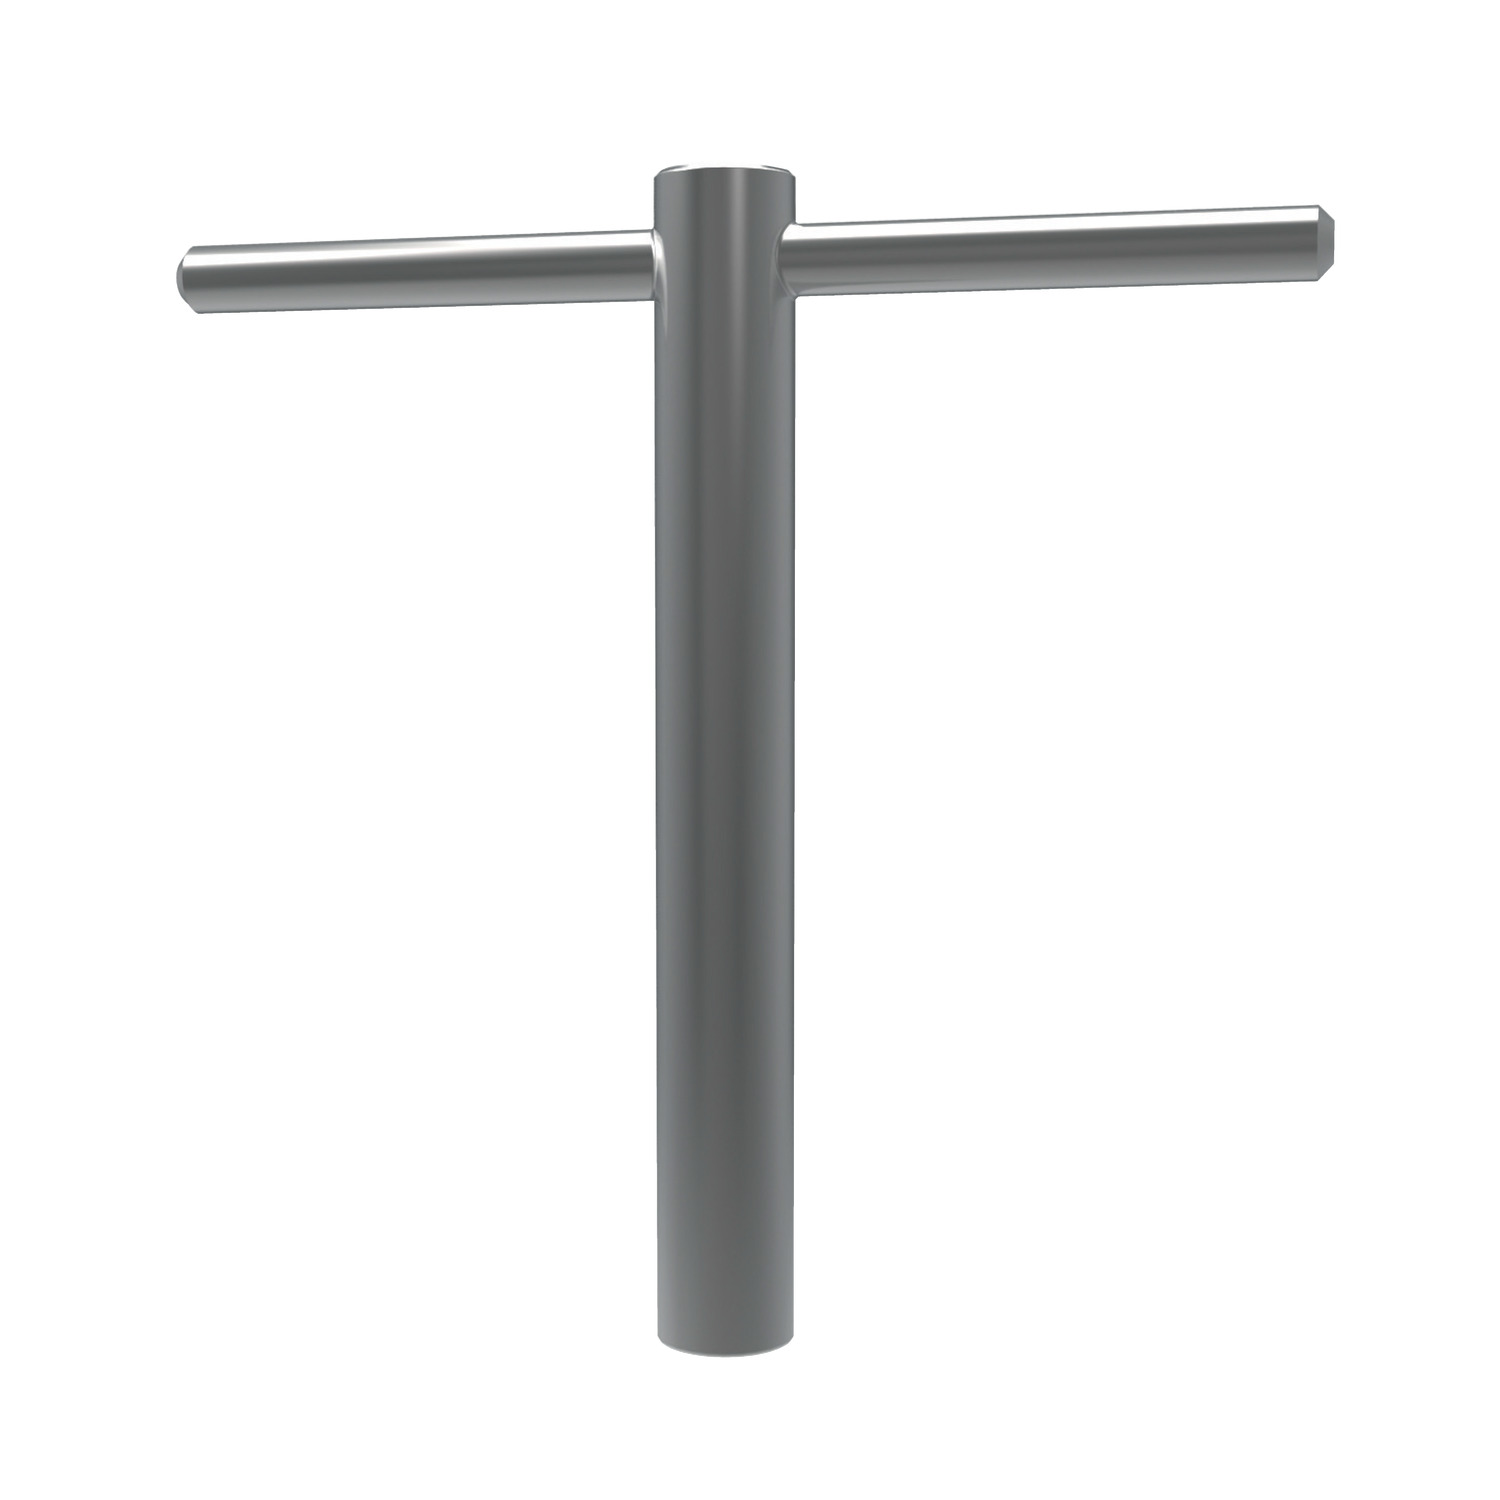 92010.W0019 T-Wrench, Square Drive (Long) - Steel. 19 - 36 - 16,0 - 320